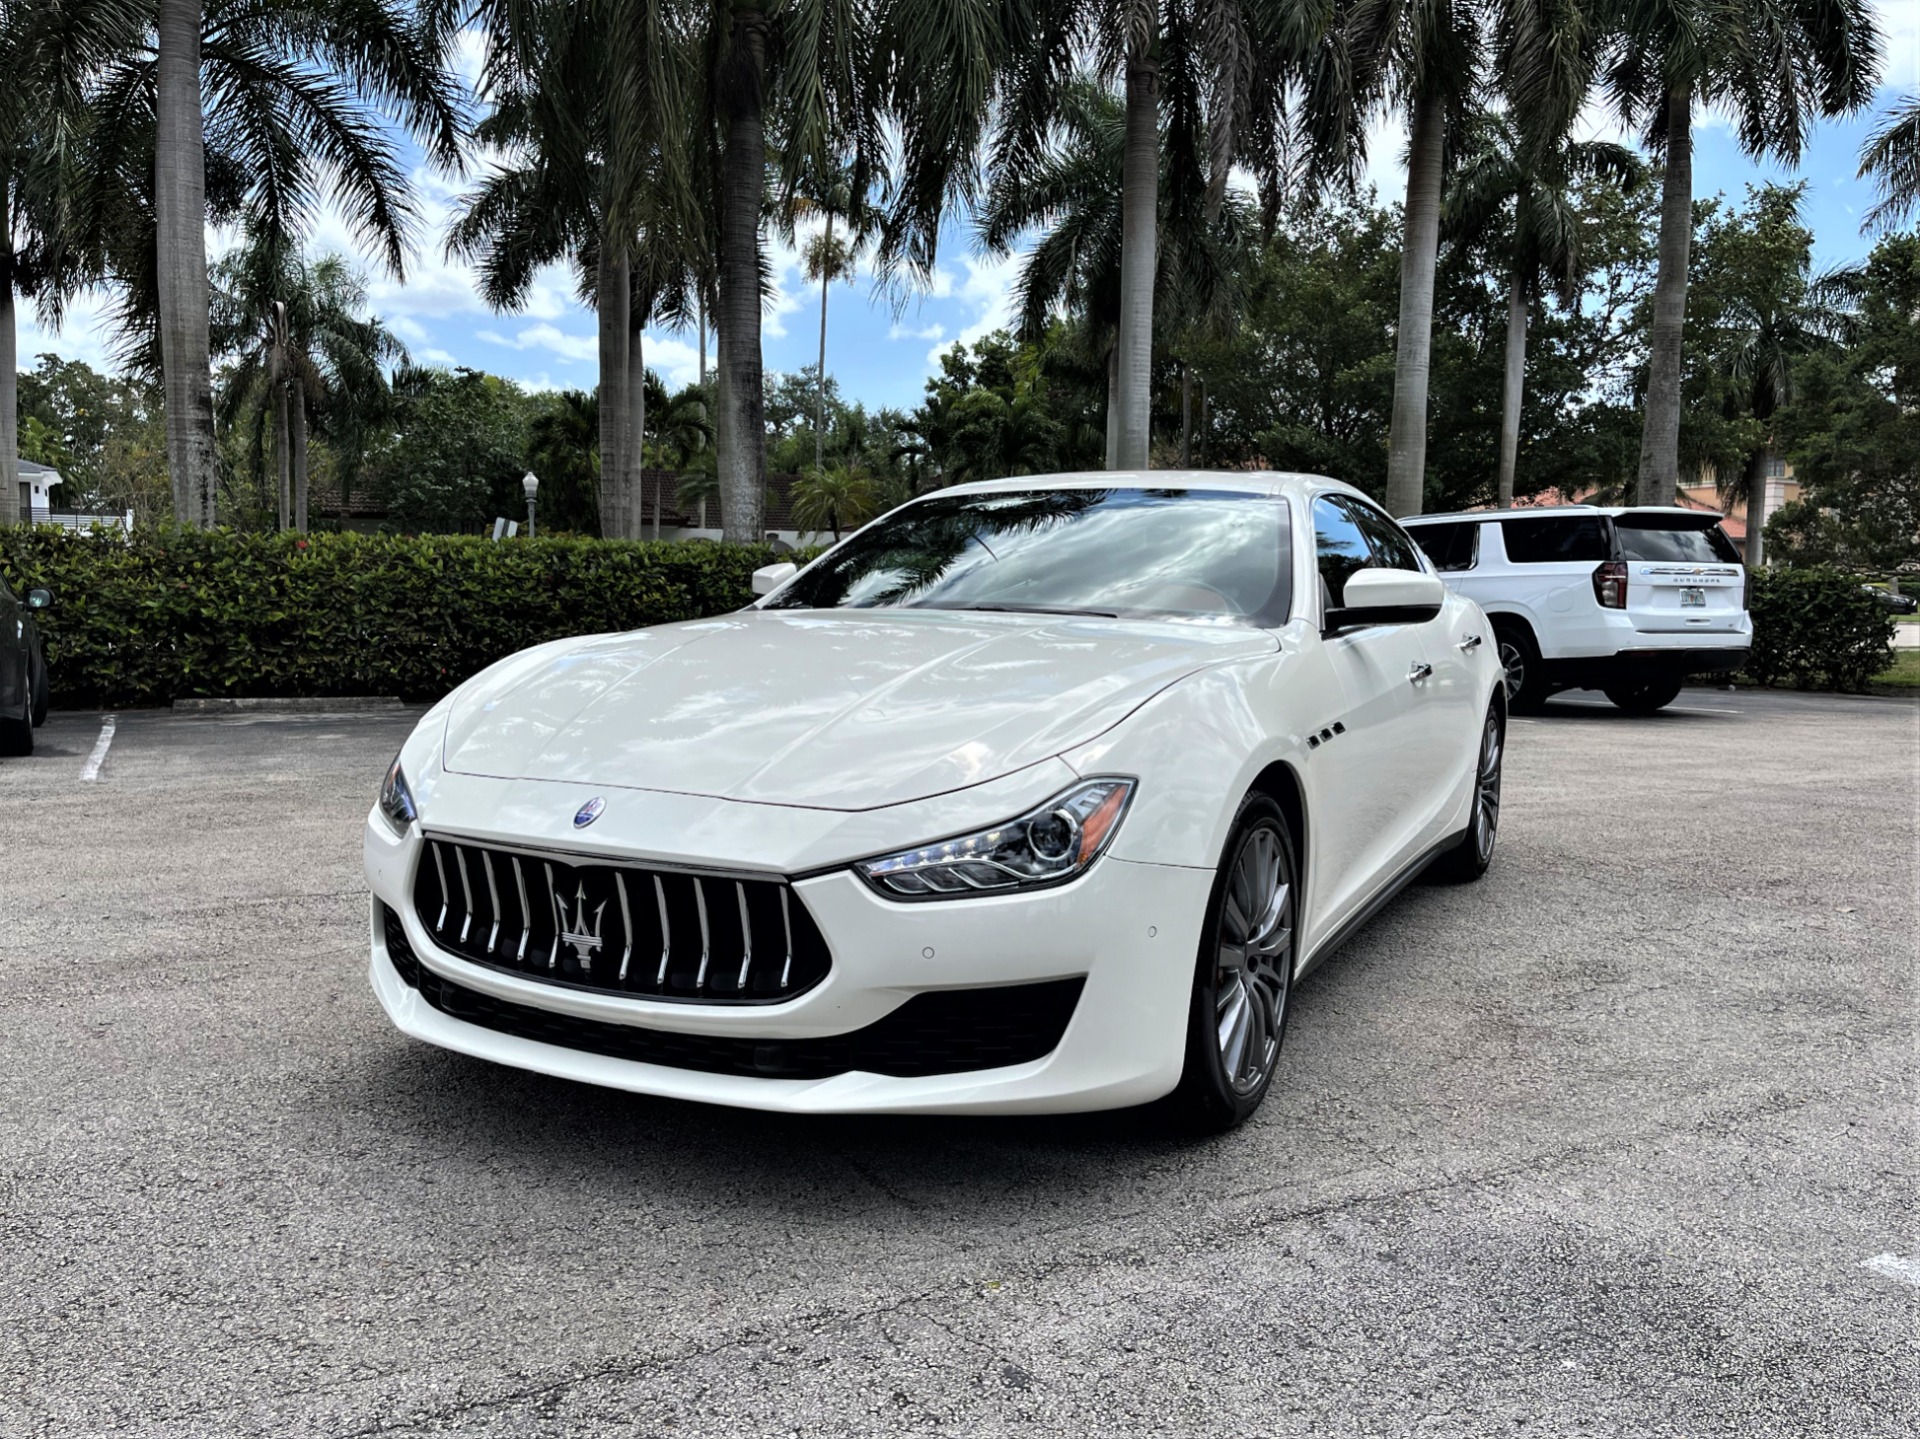 Used 2018 Maserati Ghibli SQ4 for sale Sold at The Gables Sports Cars in Miami FL 33146 4